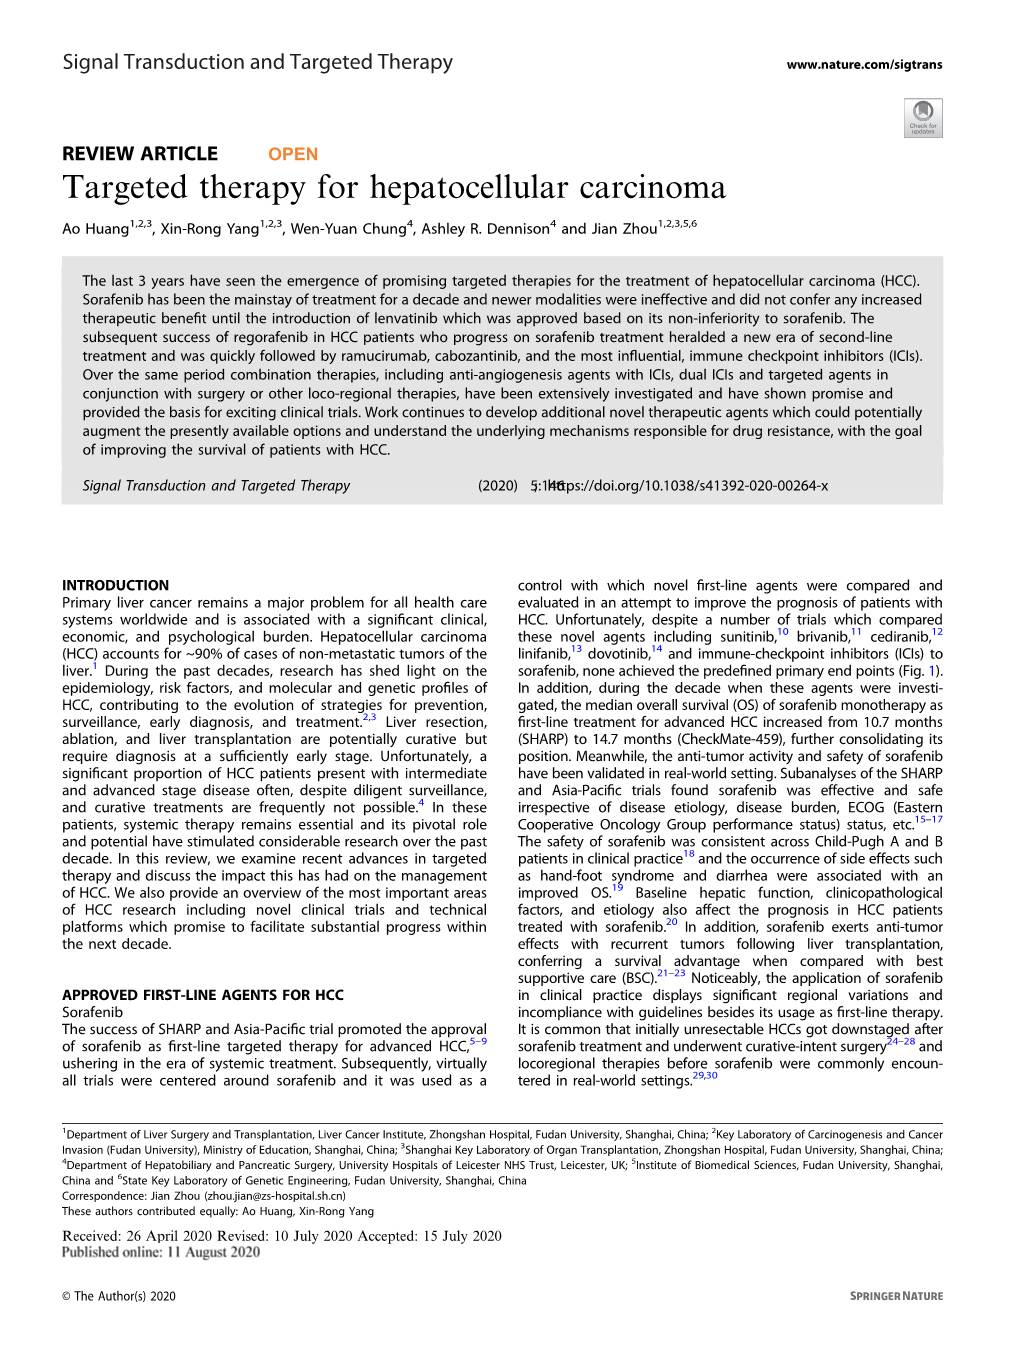 Targeted Therapy for Hepatocellular Carcinoma